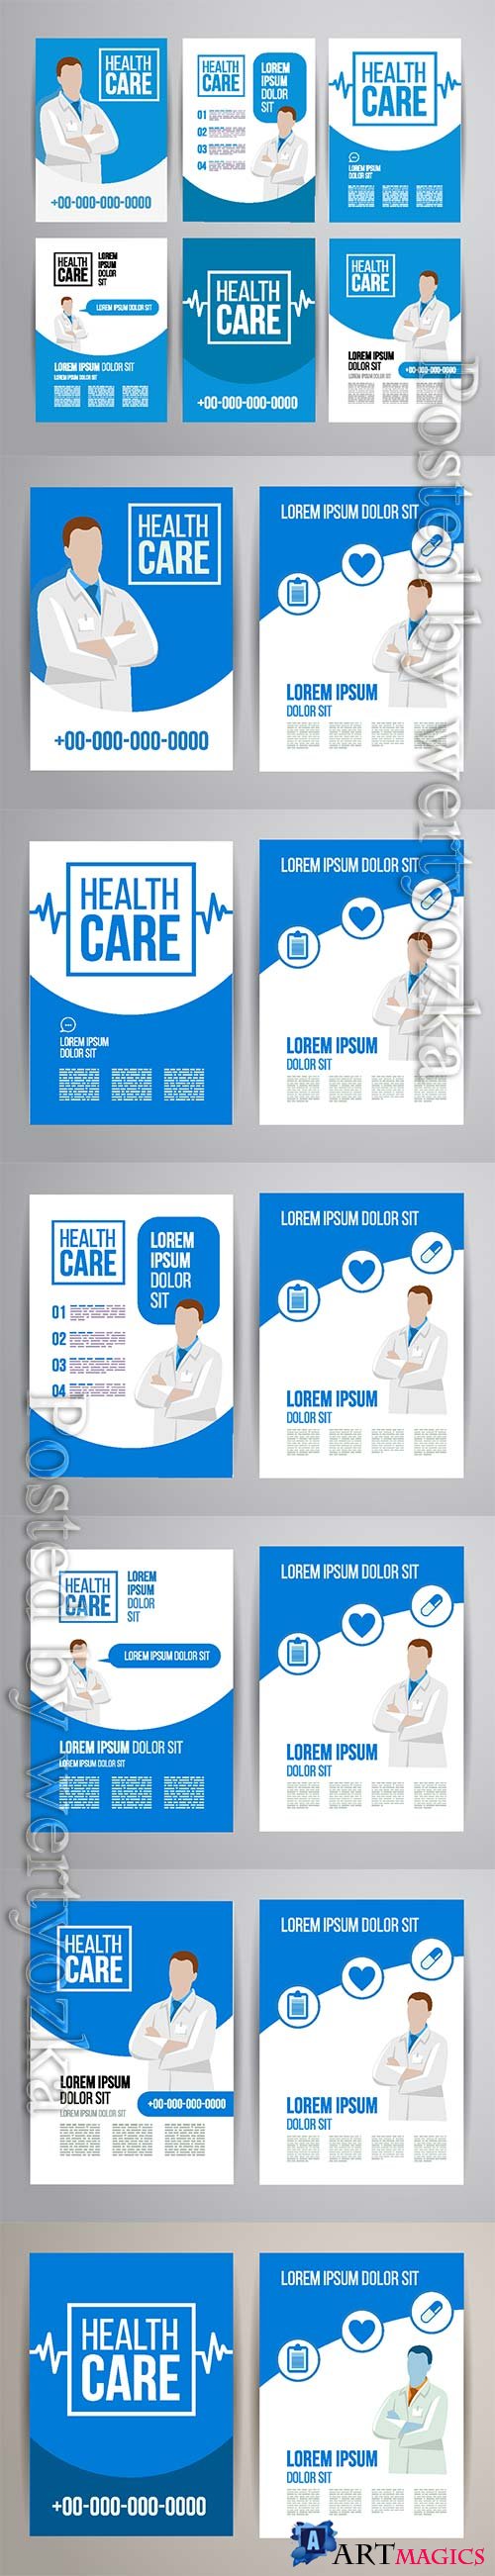 Healthcare brochure concept, clinic flyer design with doctor and medical icons